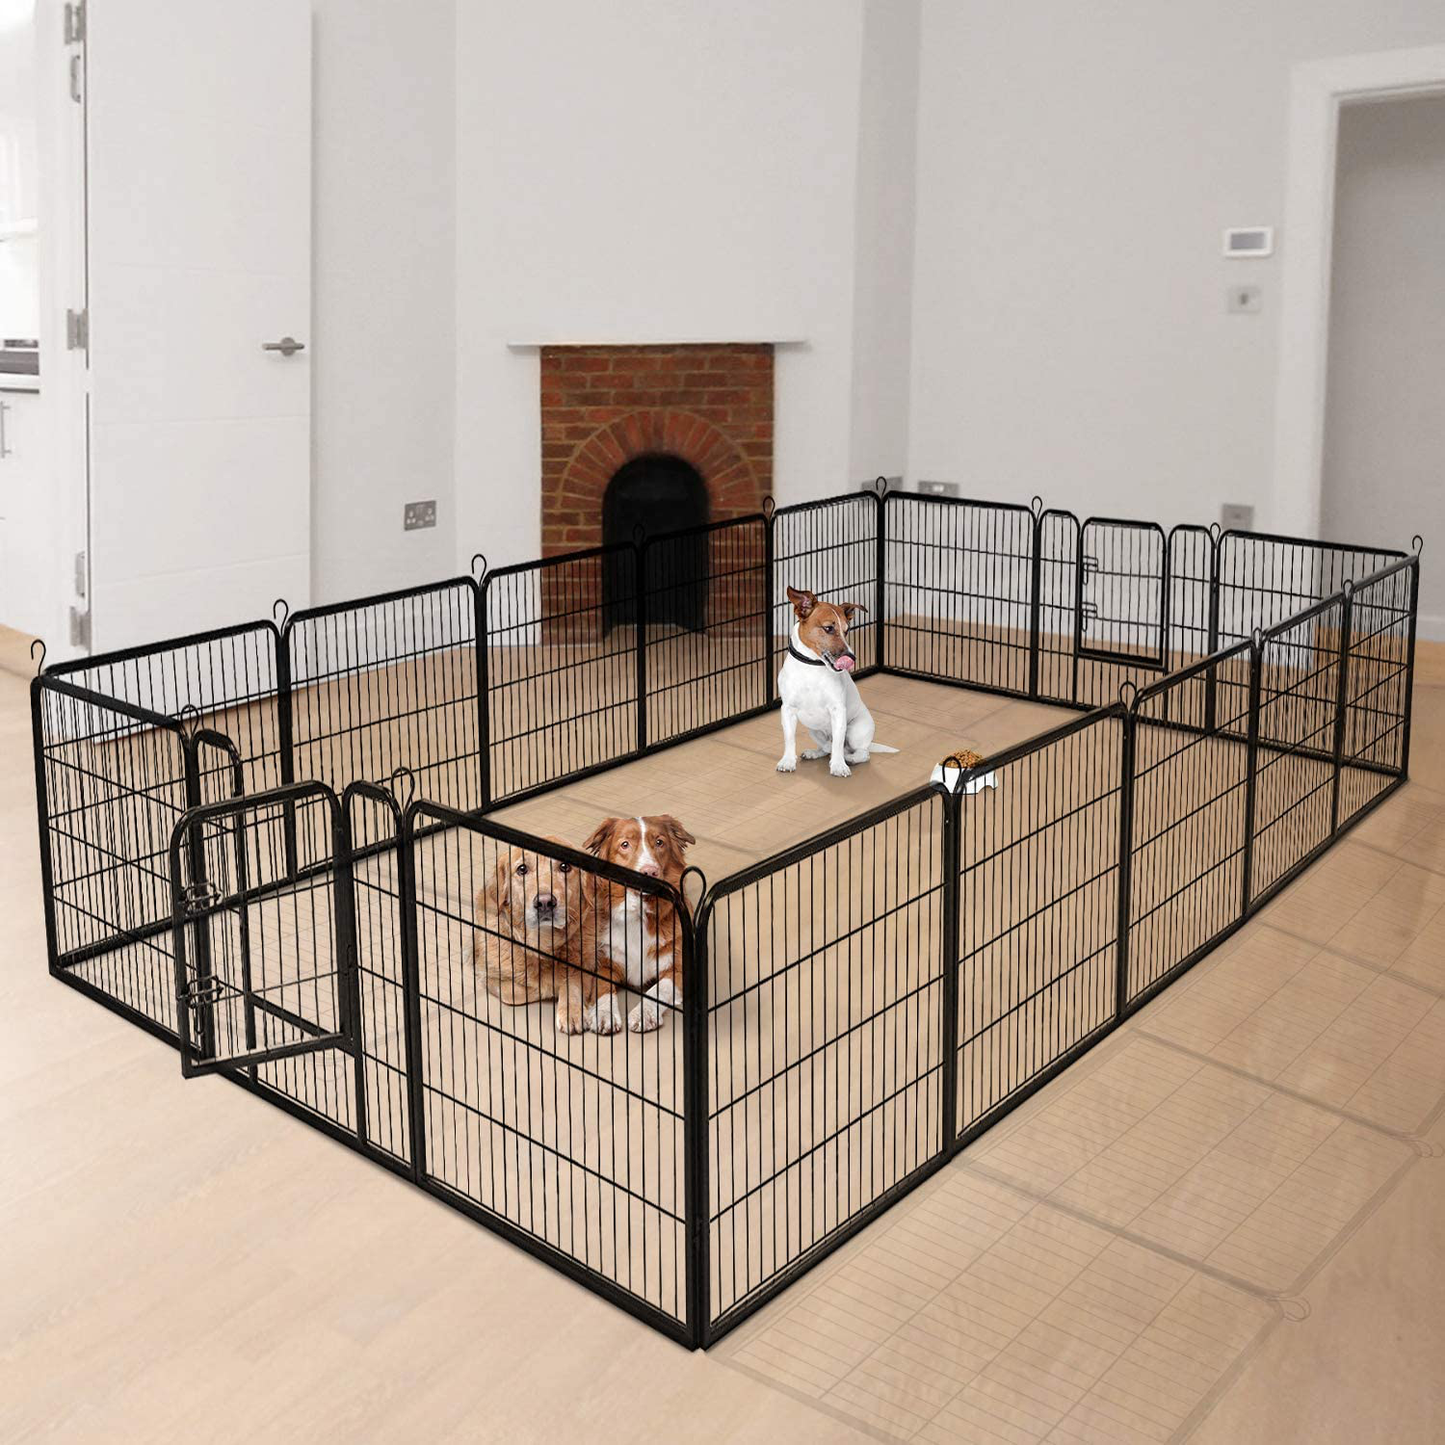 Giantex 40/48Inch Dog Playpen with Door, 16/8 Panel Pet Playpen for Large and Small Dogs, Portable Foldable Freestanding Dog Exercise Pens, Metal Dog Playpen Indoor & Outdoor (16 Panels, 40) Animals & Pet Supplies > Pet Supplies > Dog Supplies > Dog Treadmills Giantex   